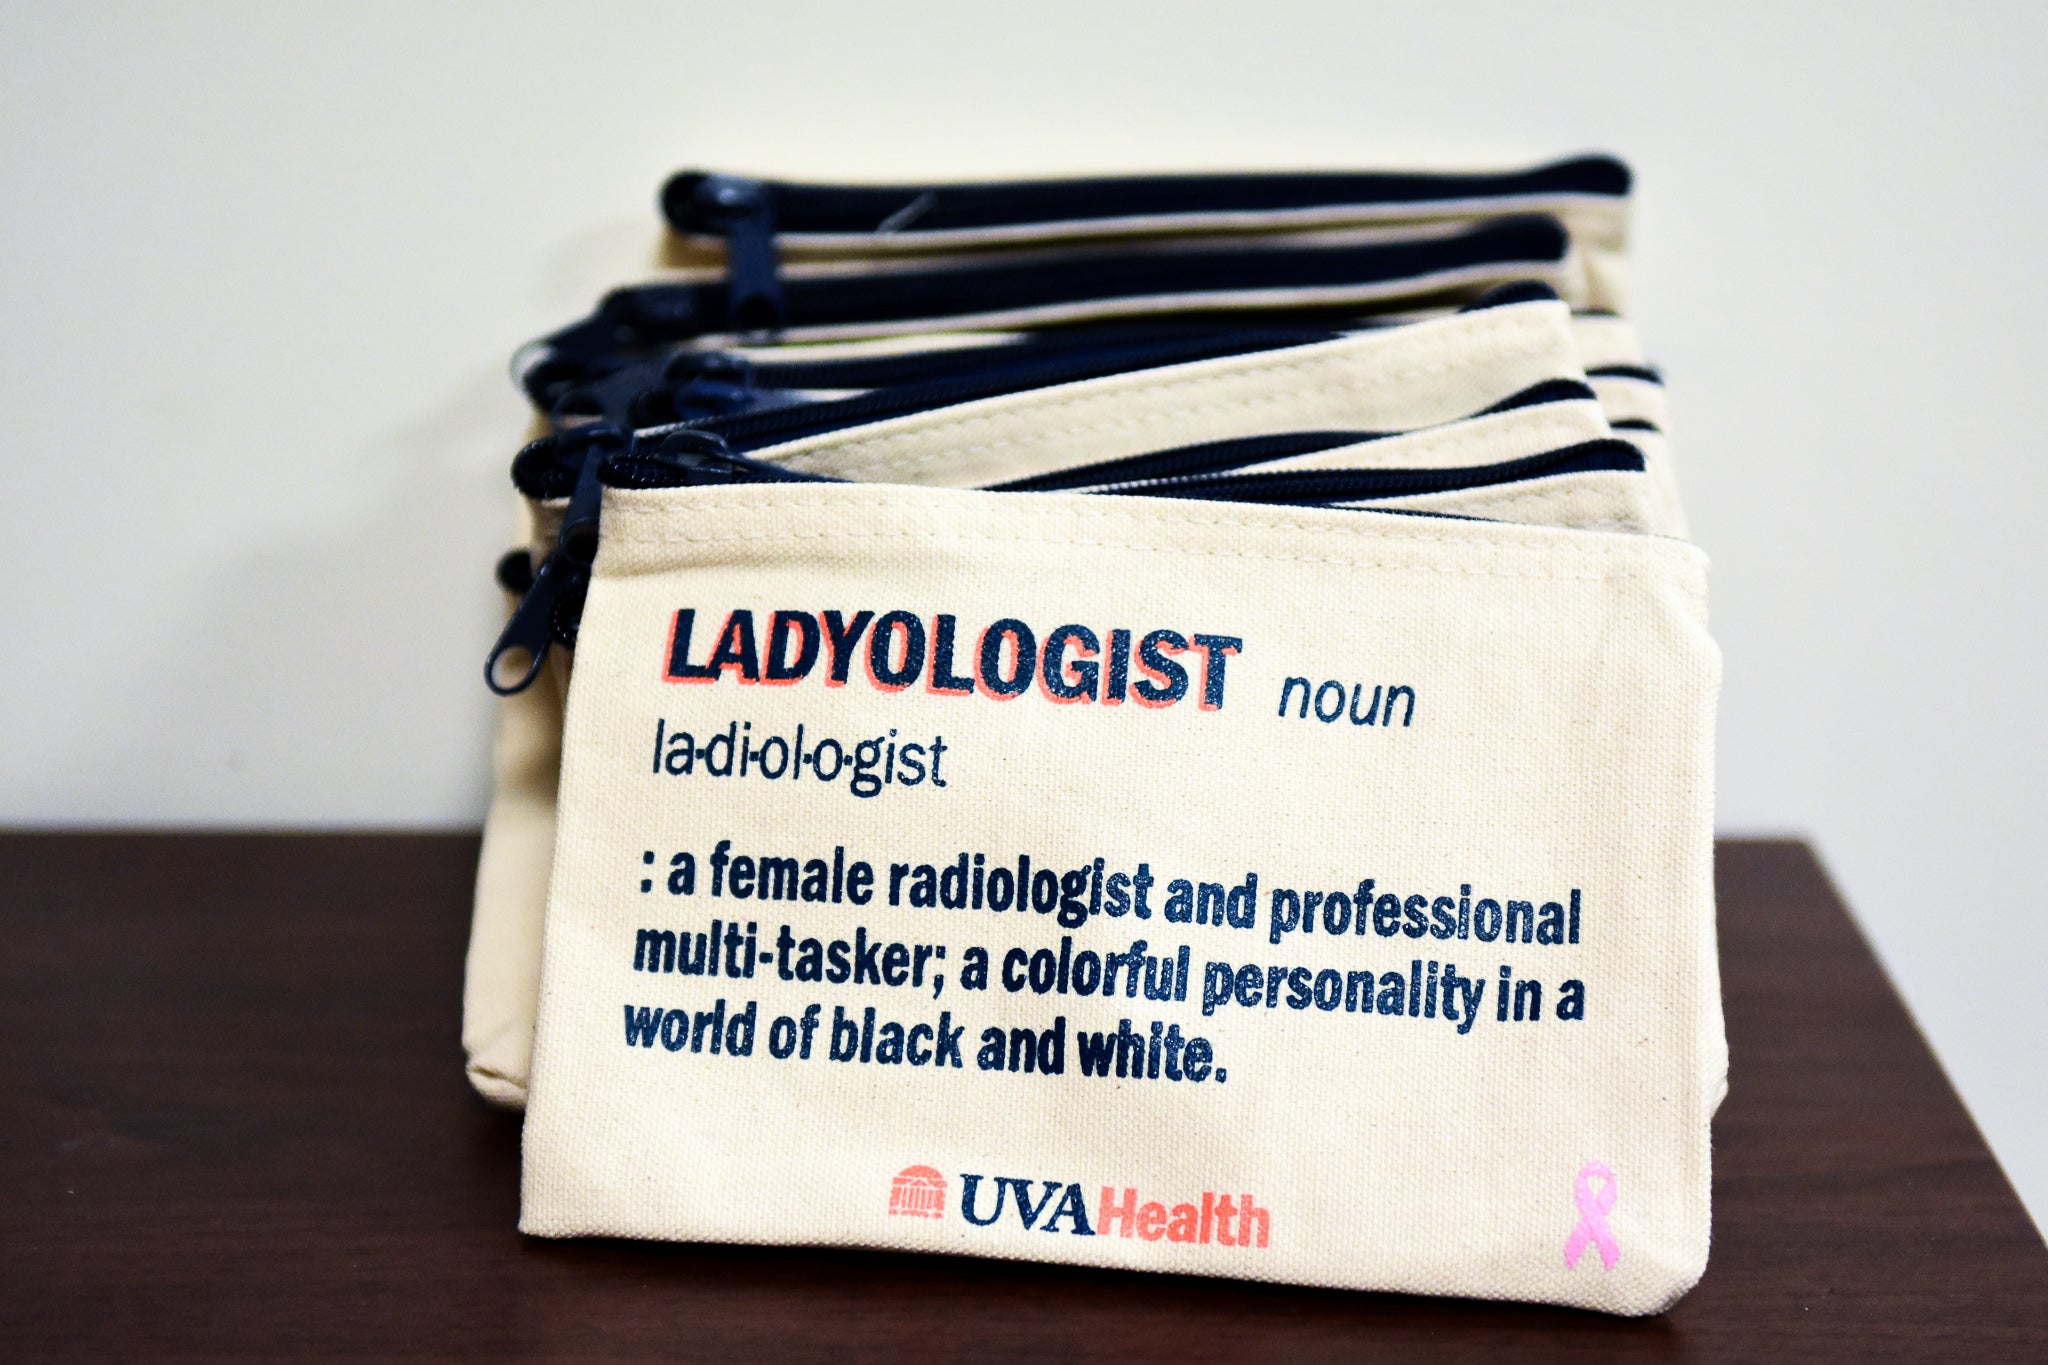 Ladyologist pencil pouch that defines the word ladyologist